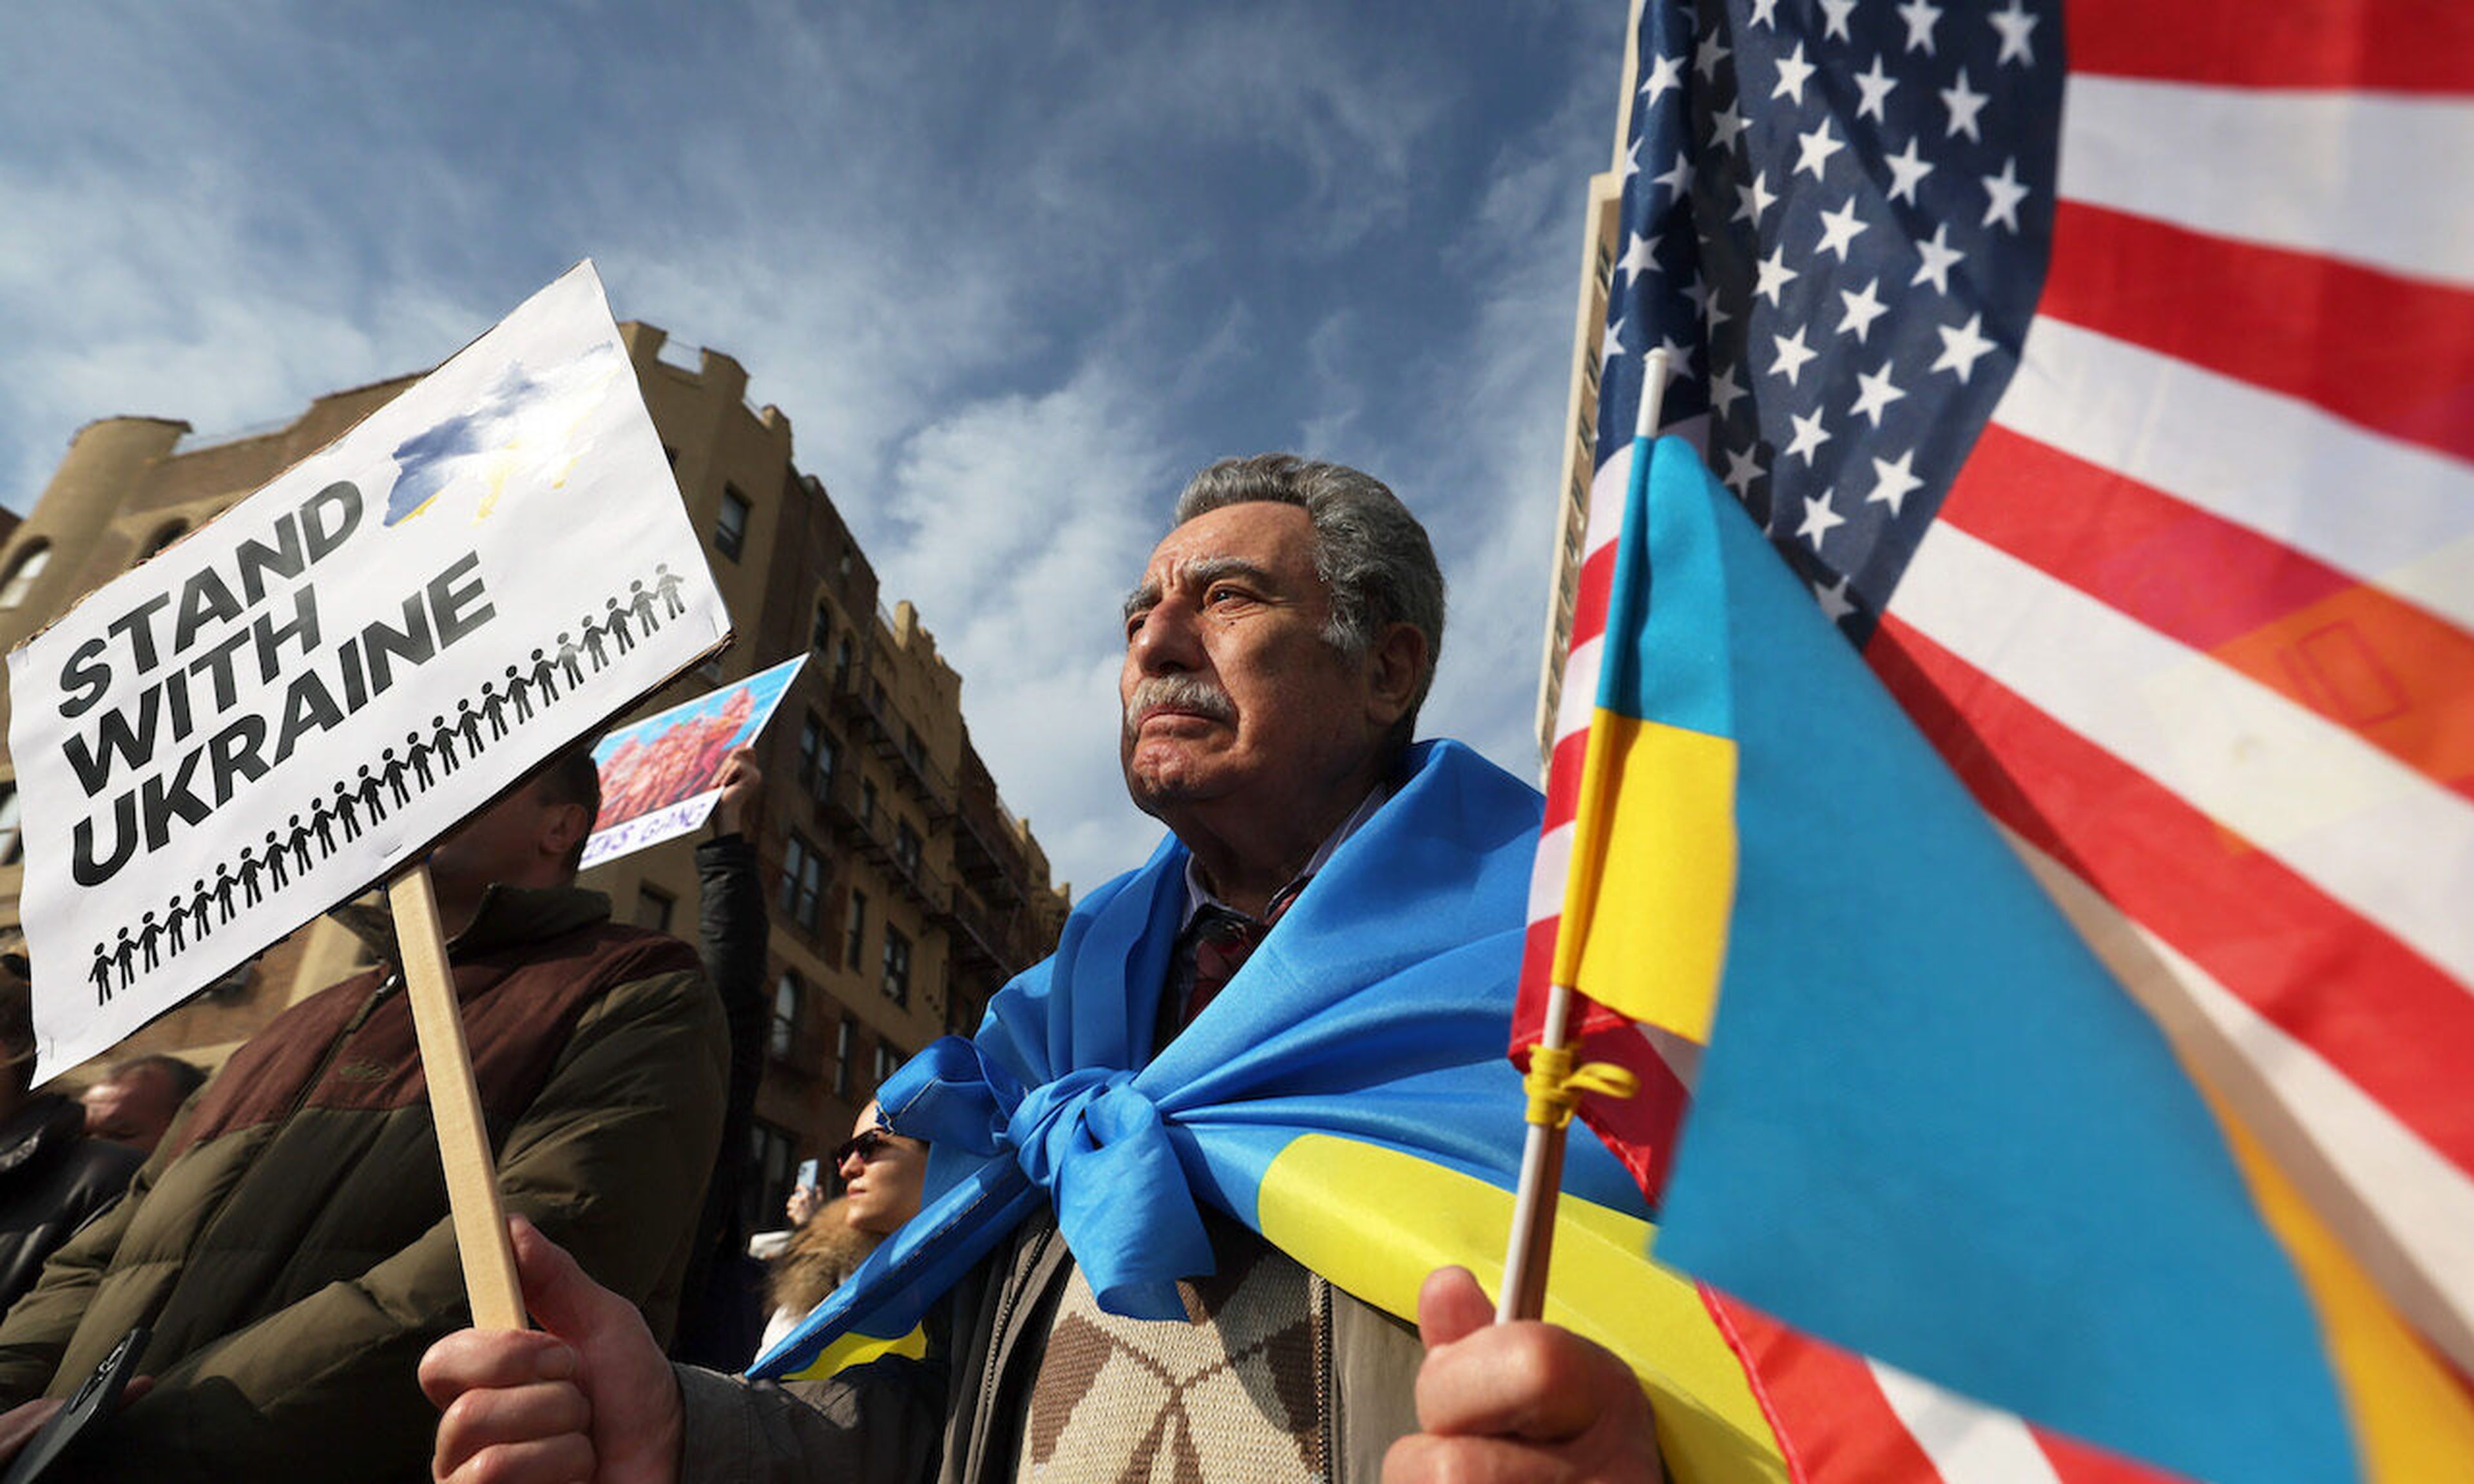 A proteter in New York holds a sign and flags as he joins others who gathered for a rally in support of Ukraine (Photo by Michael M. Santiago/Getty Images)